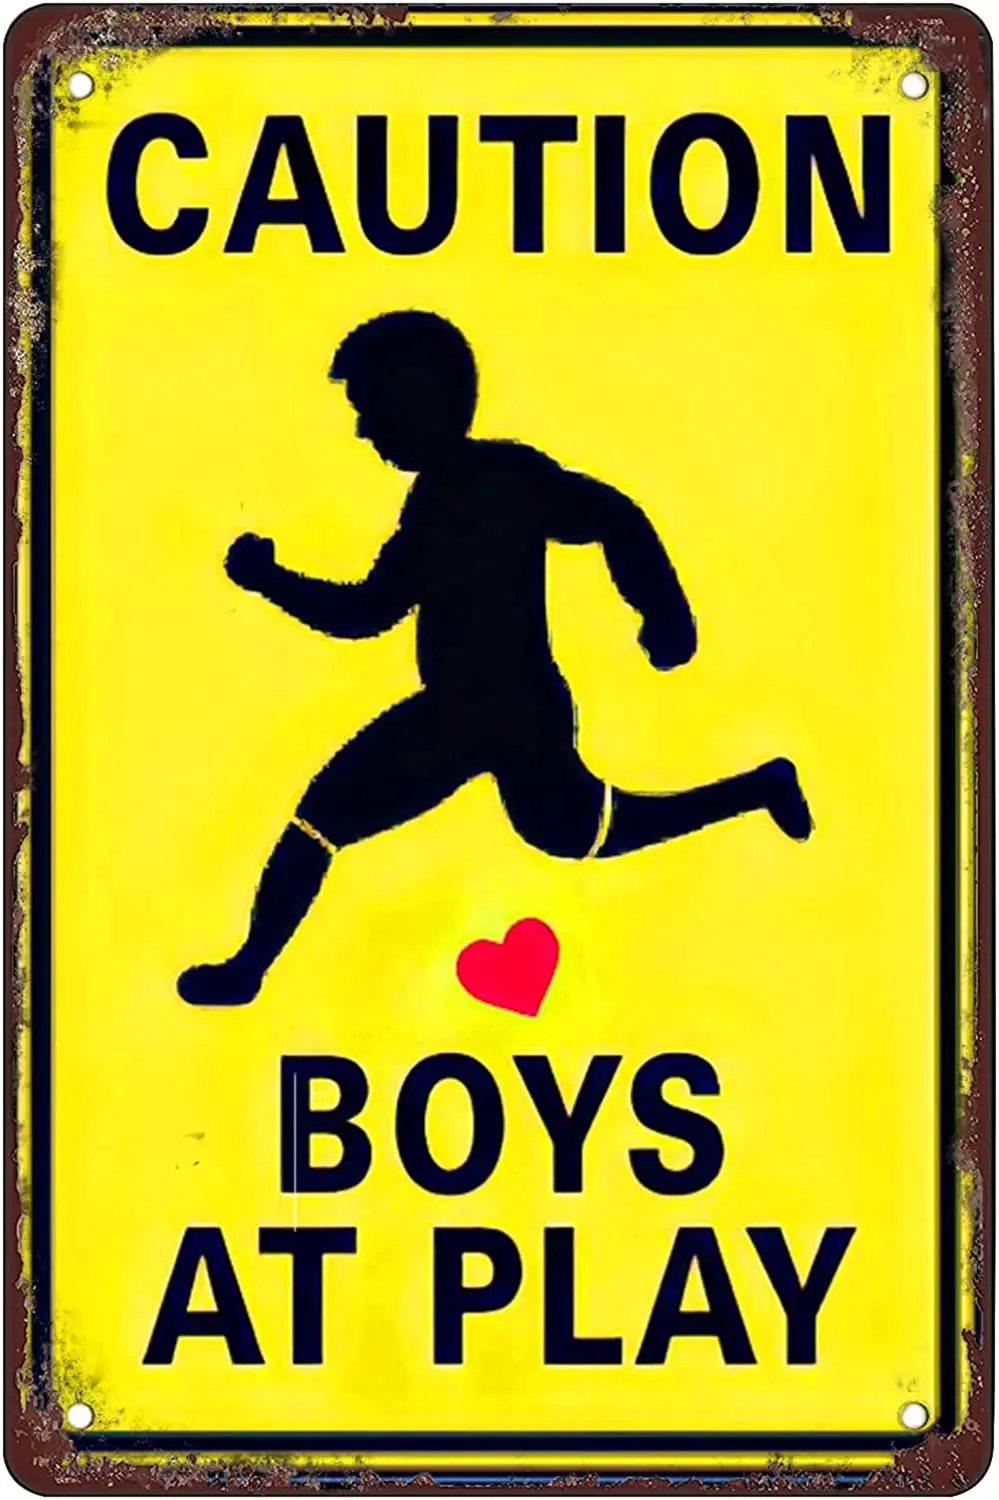 

Classics Novelty Metal Tin Sign Caution Boys at Play Home Wall Decor Birthday Gift Garden Yard Signs Vintage Printing Plaque